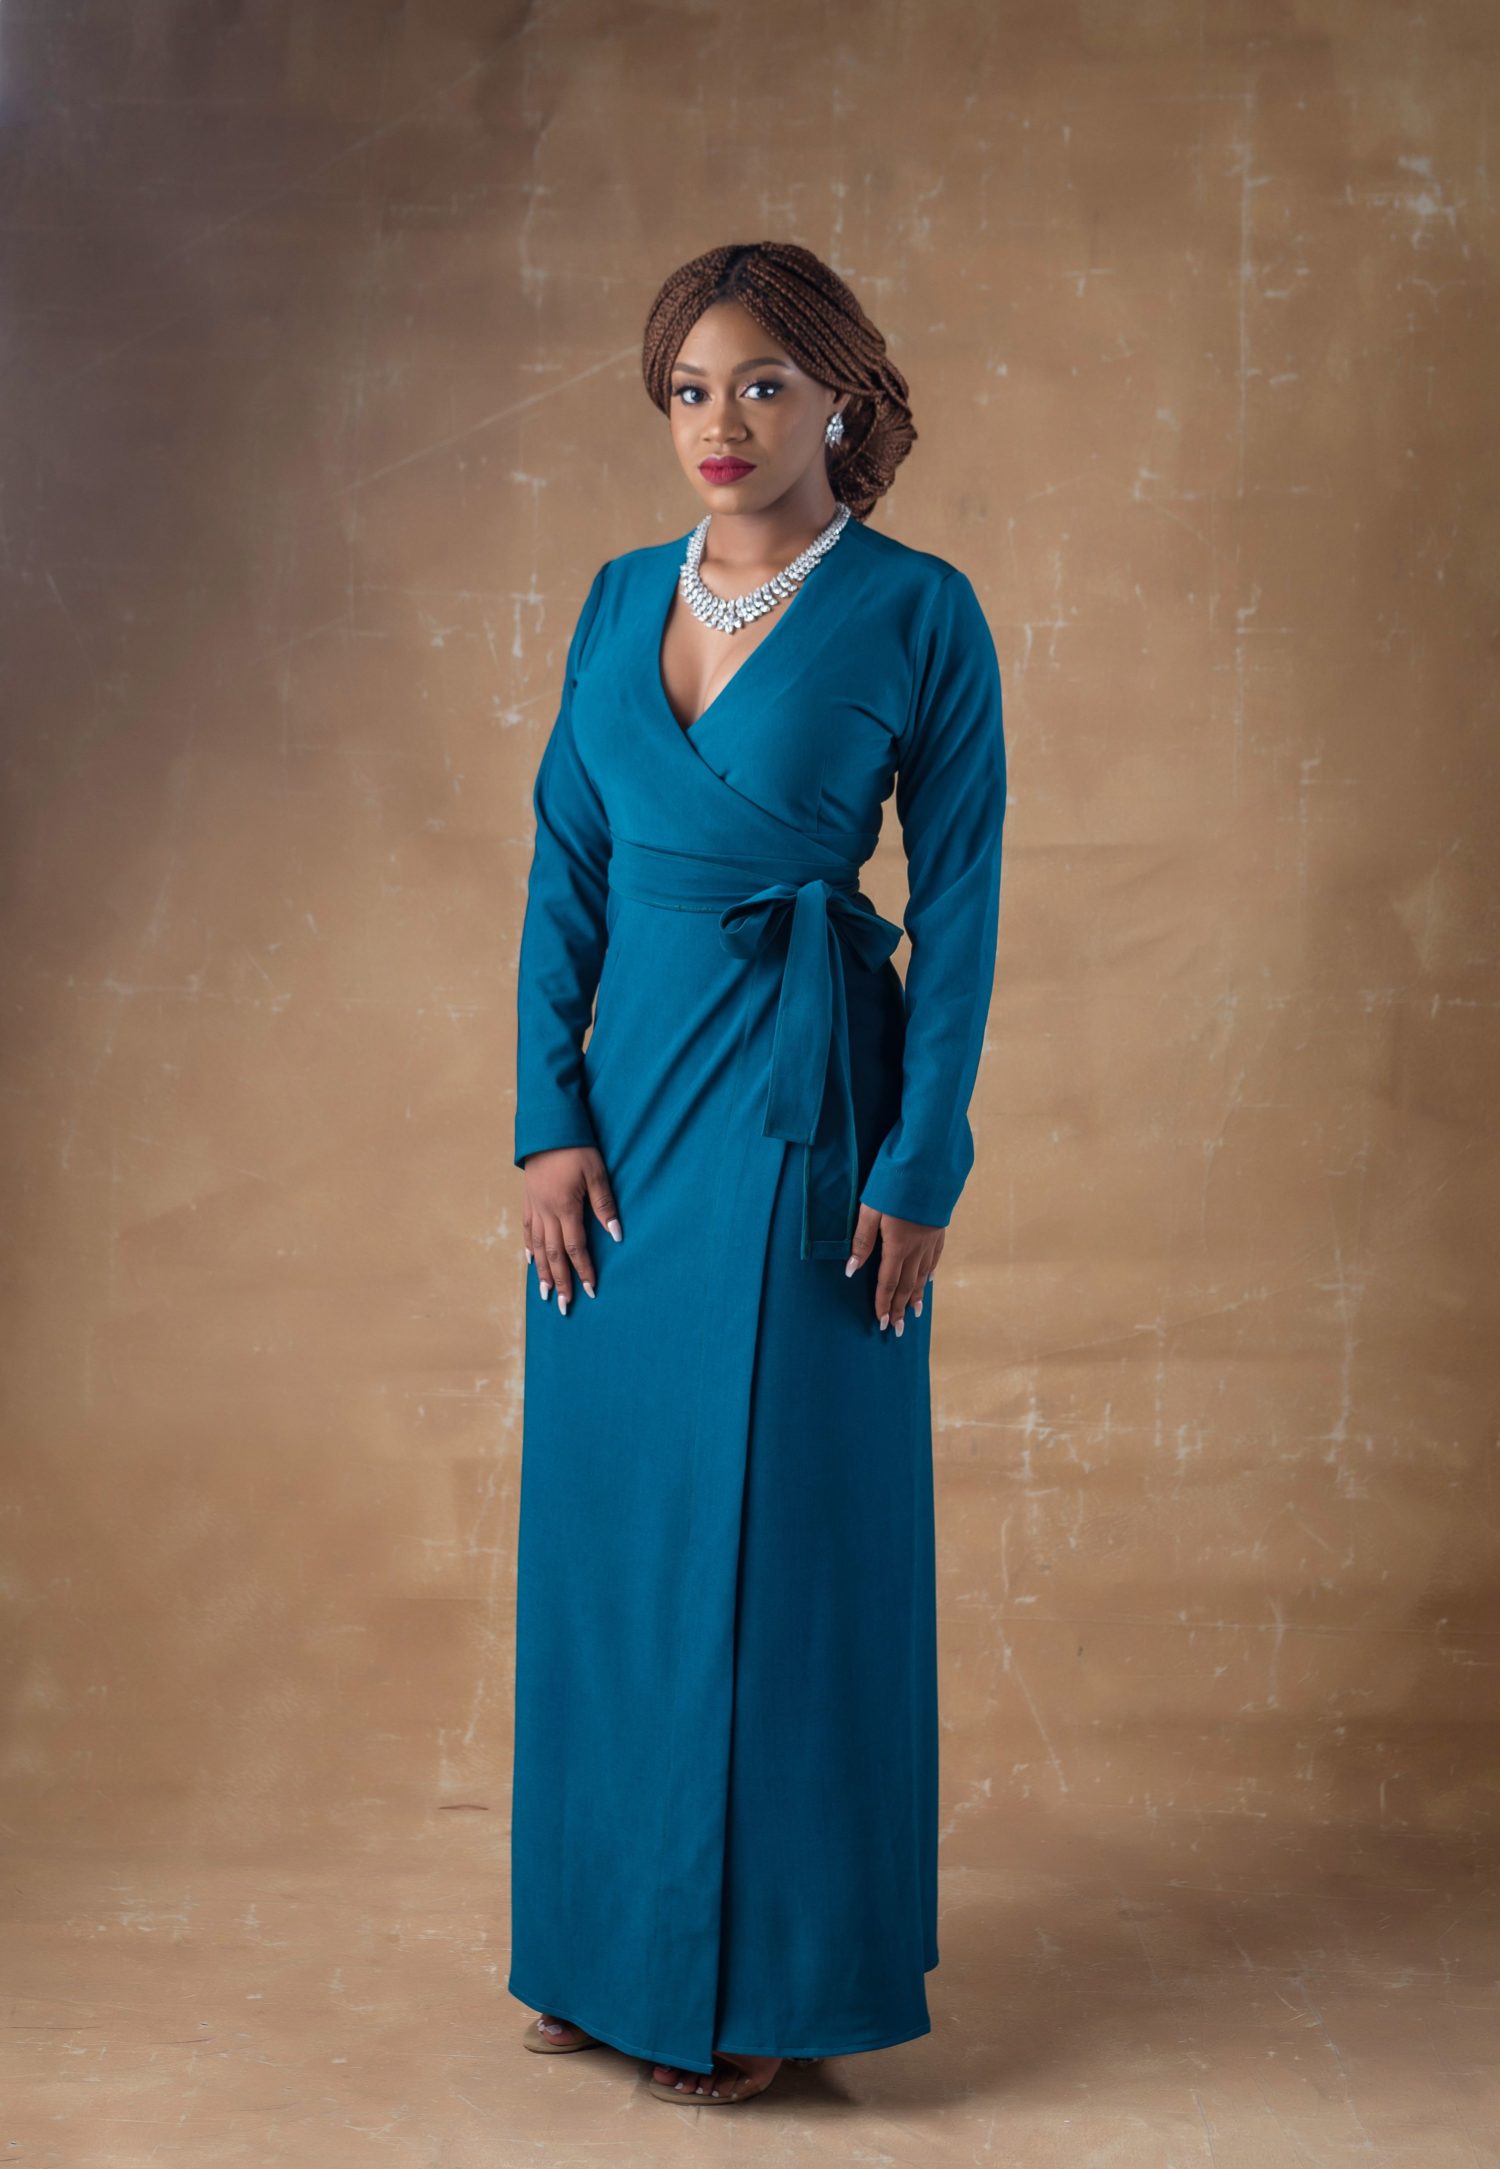 Nigerian Fashion Brand Maxine Arthurs Releases It’s Debut Collection